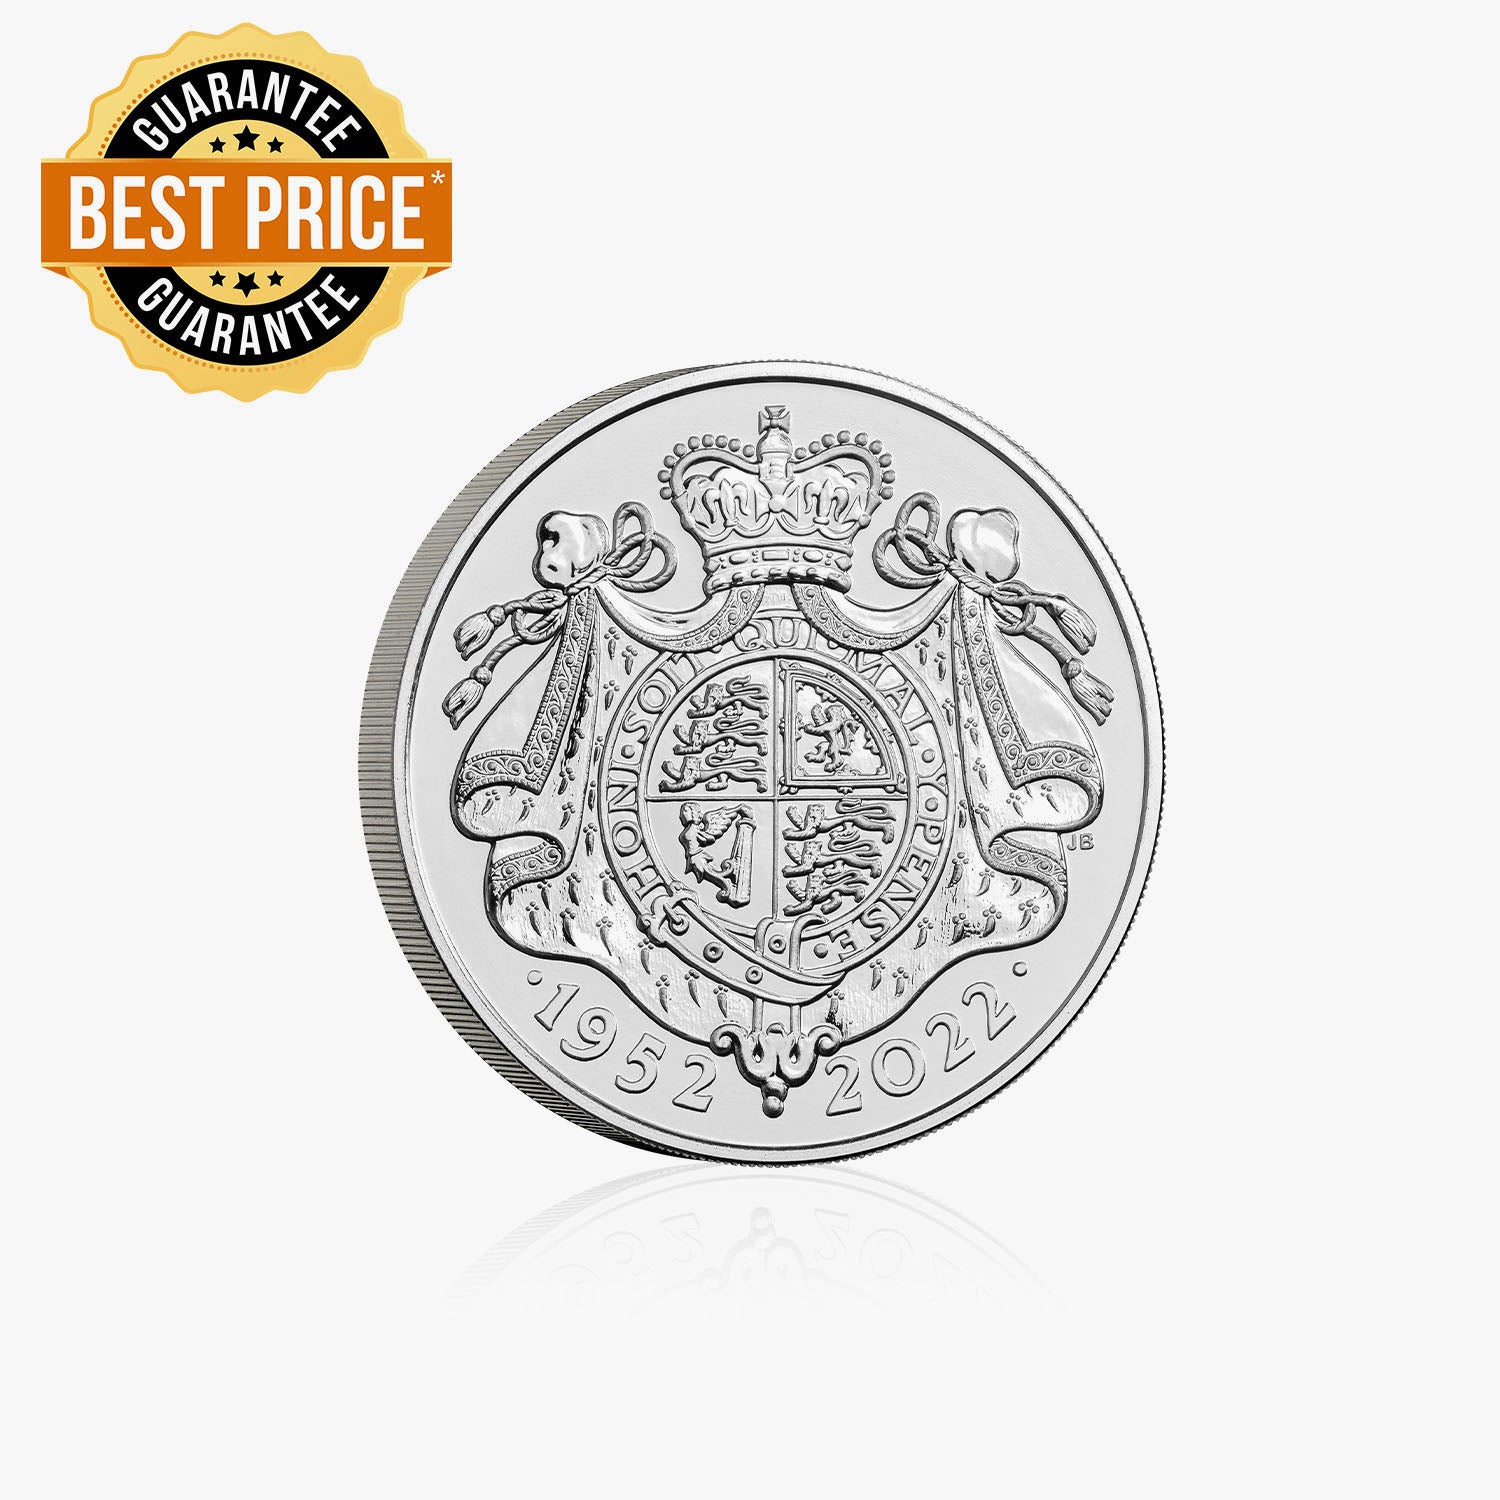 The Platinum Jubilee of Her Majesty The Queen 2022 UK £5 BU Coin